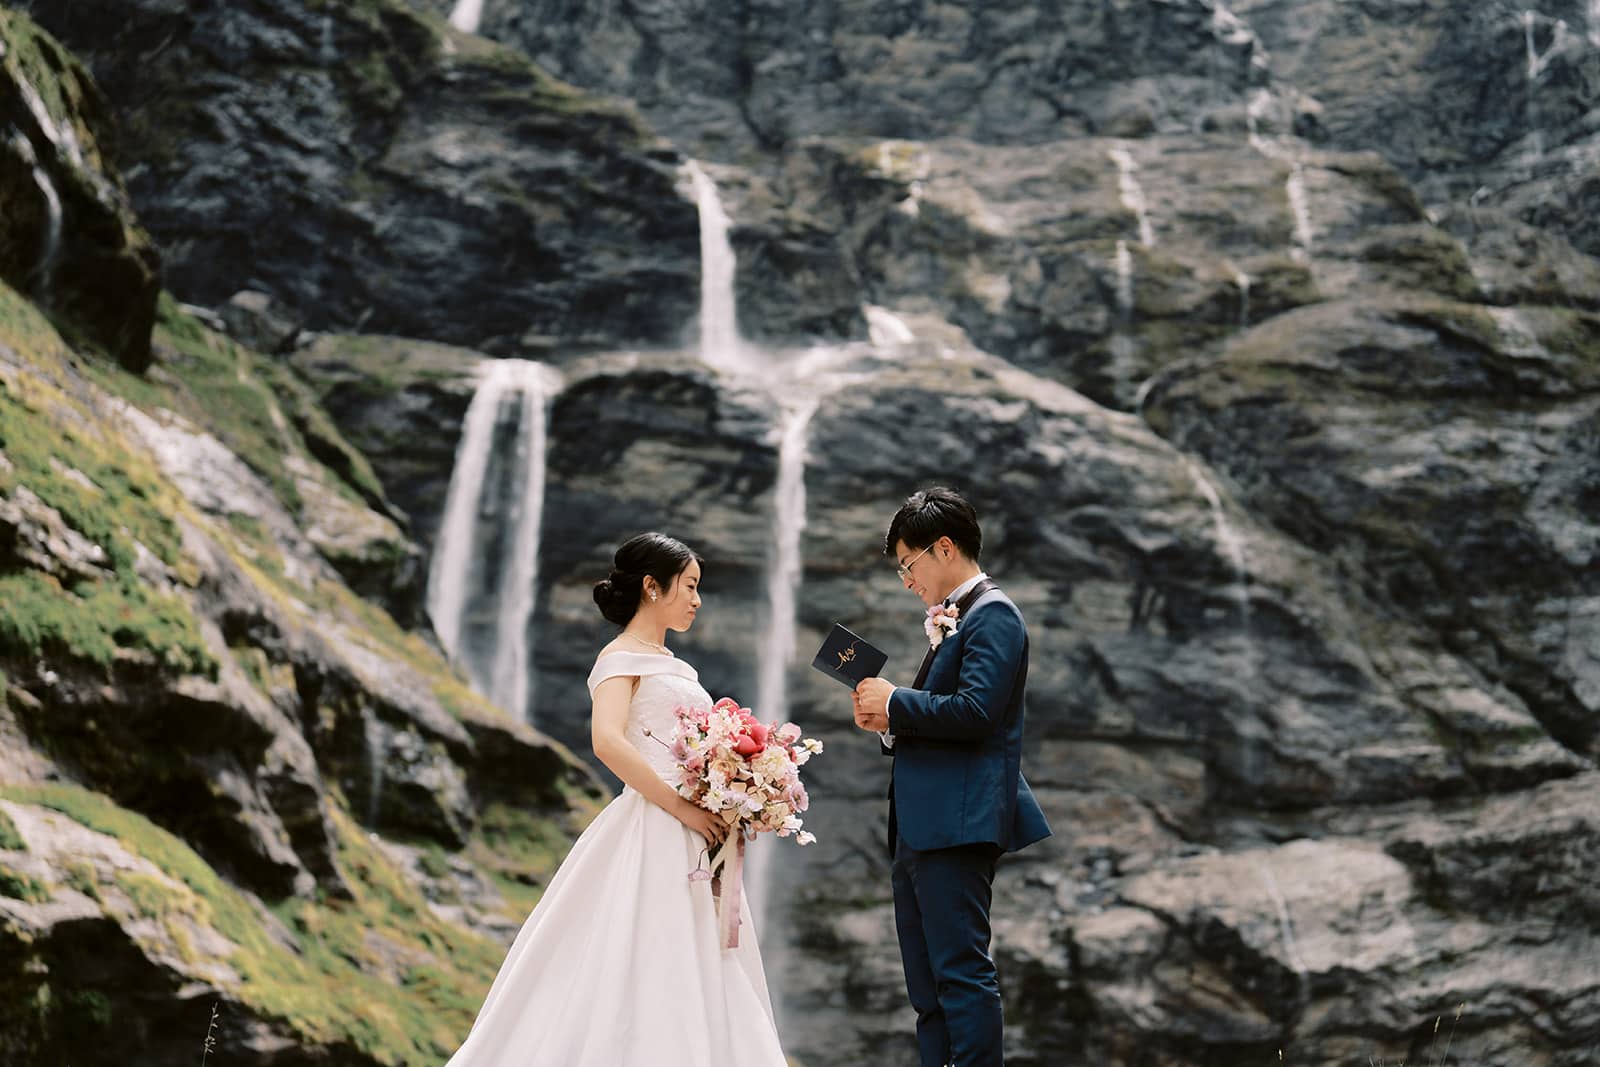 Queenstown New Zealand Heli Wedding Elopement Photographer クイーンズタウン　ニュージーランド　エロープメント 結婚式 | A couple exchanging vows in front of a waterfall, captured by a Queenstown Wedding Photographer, creating a scenic and intimate wedding moment.